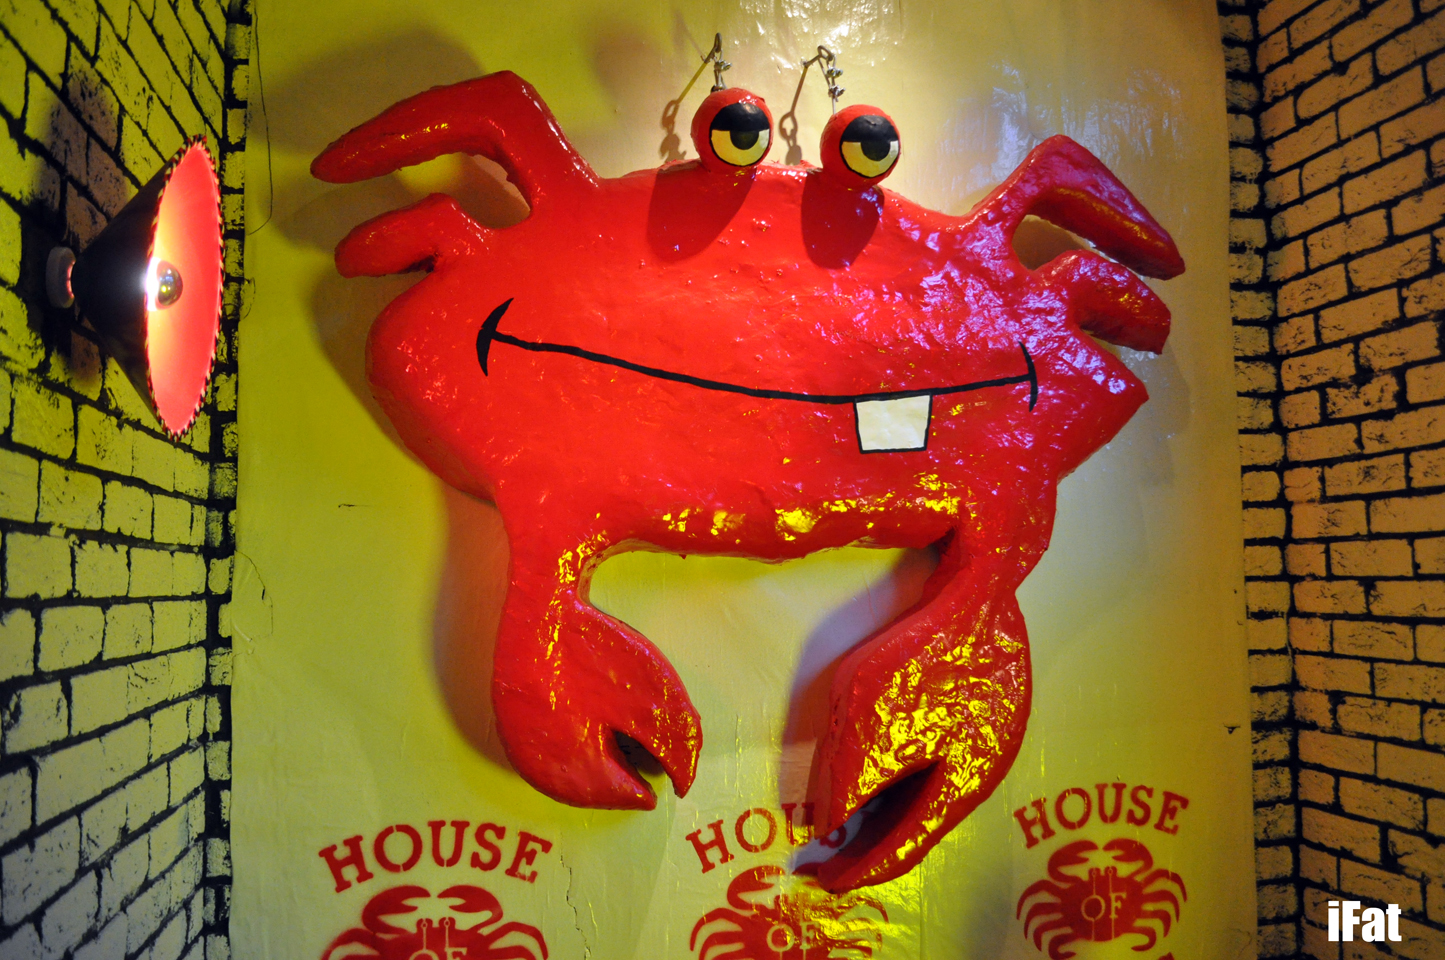 House of Crabs, Redfern